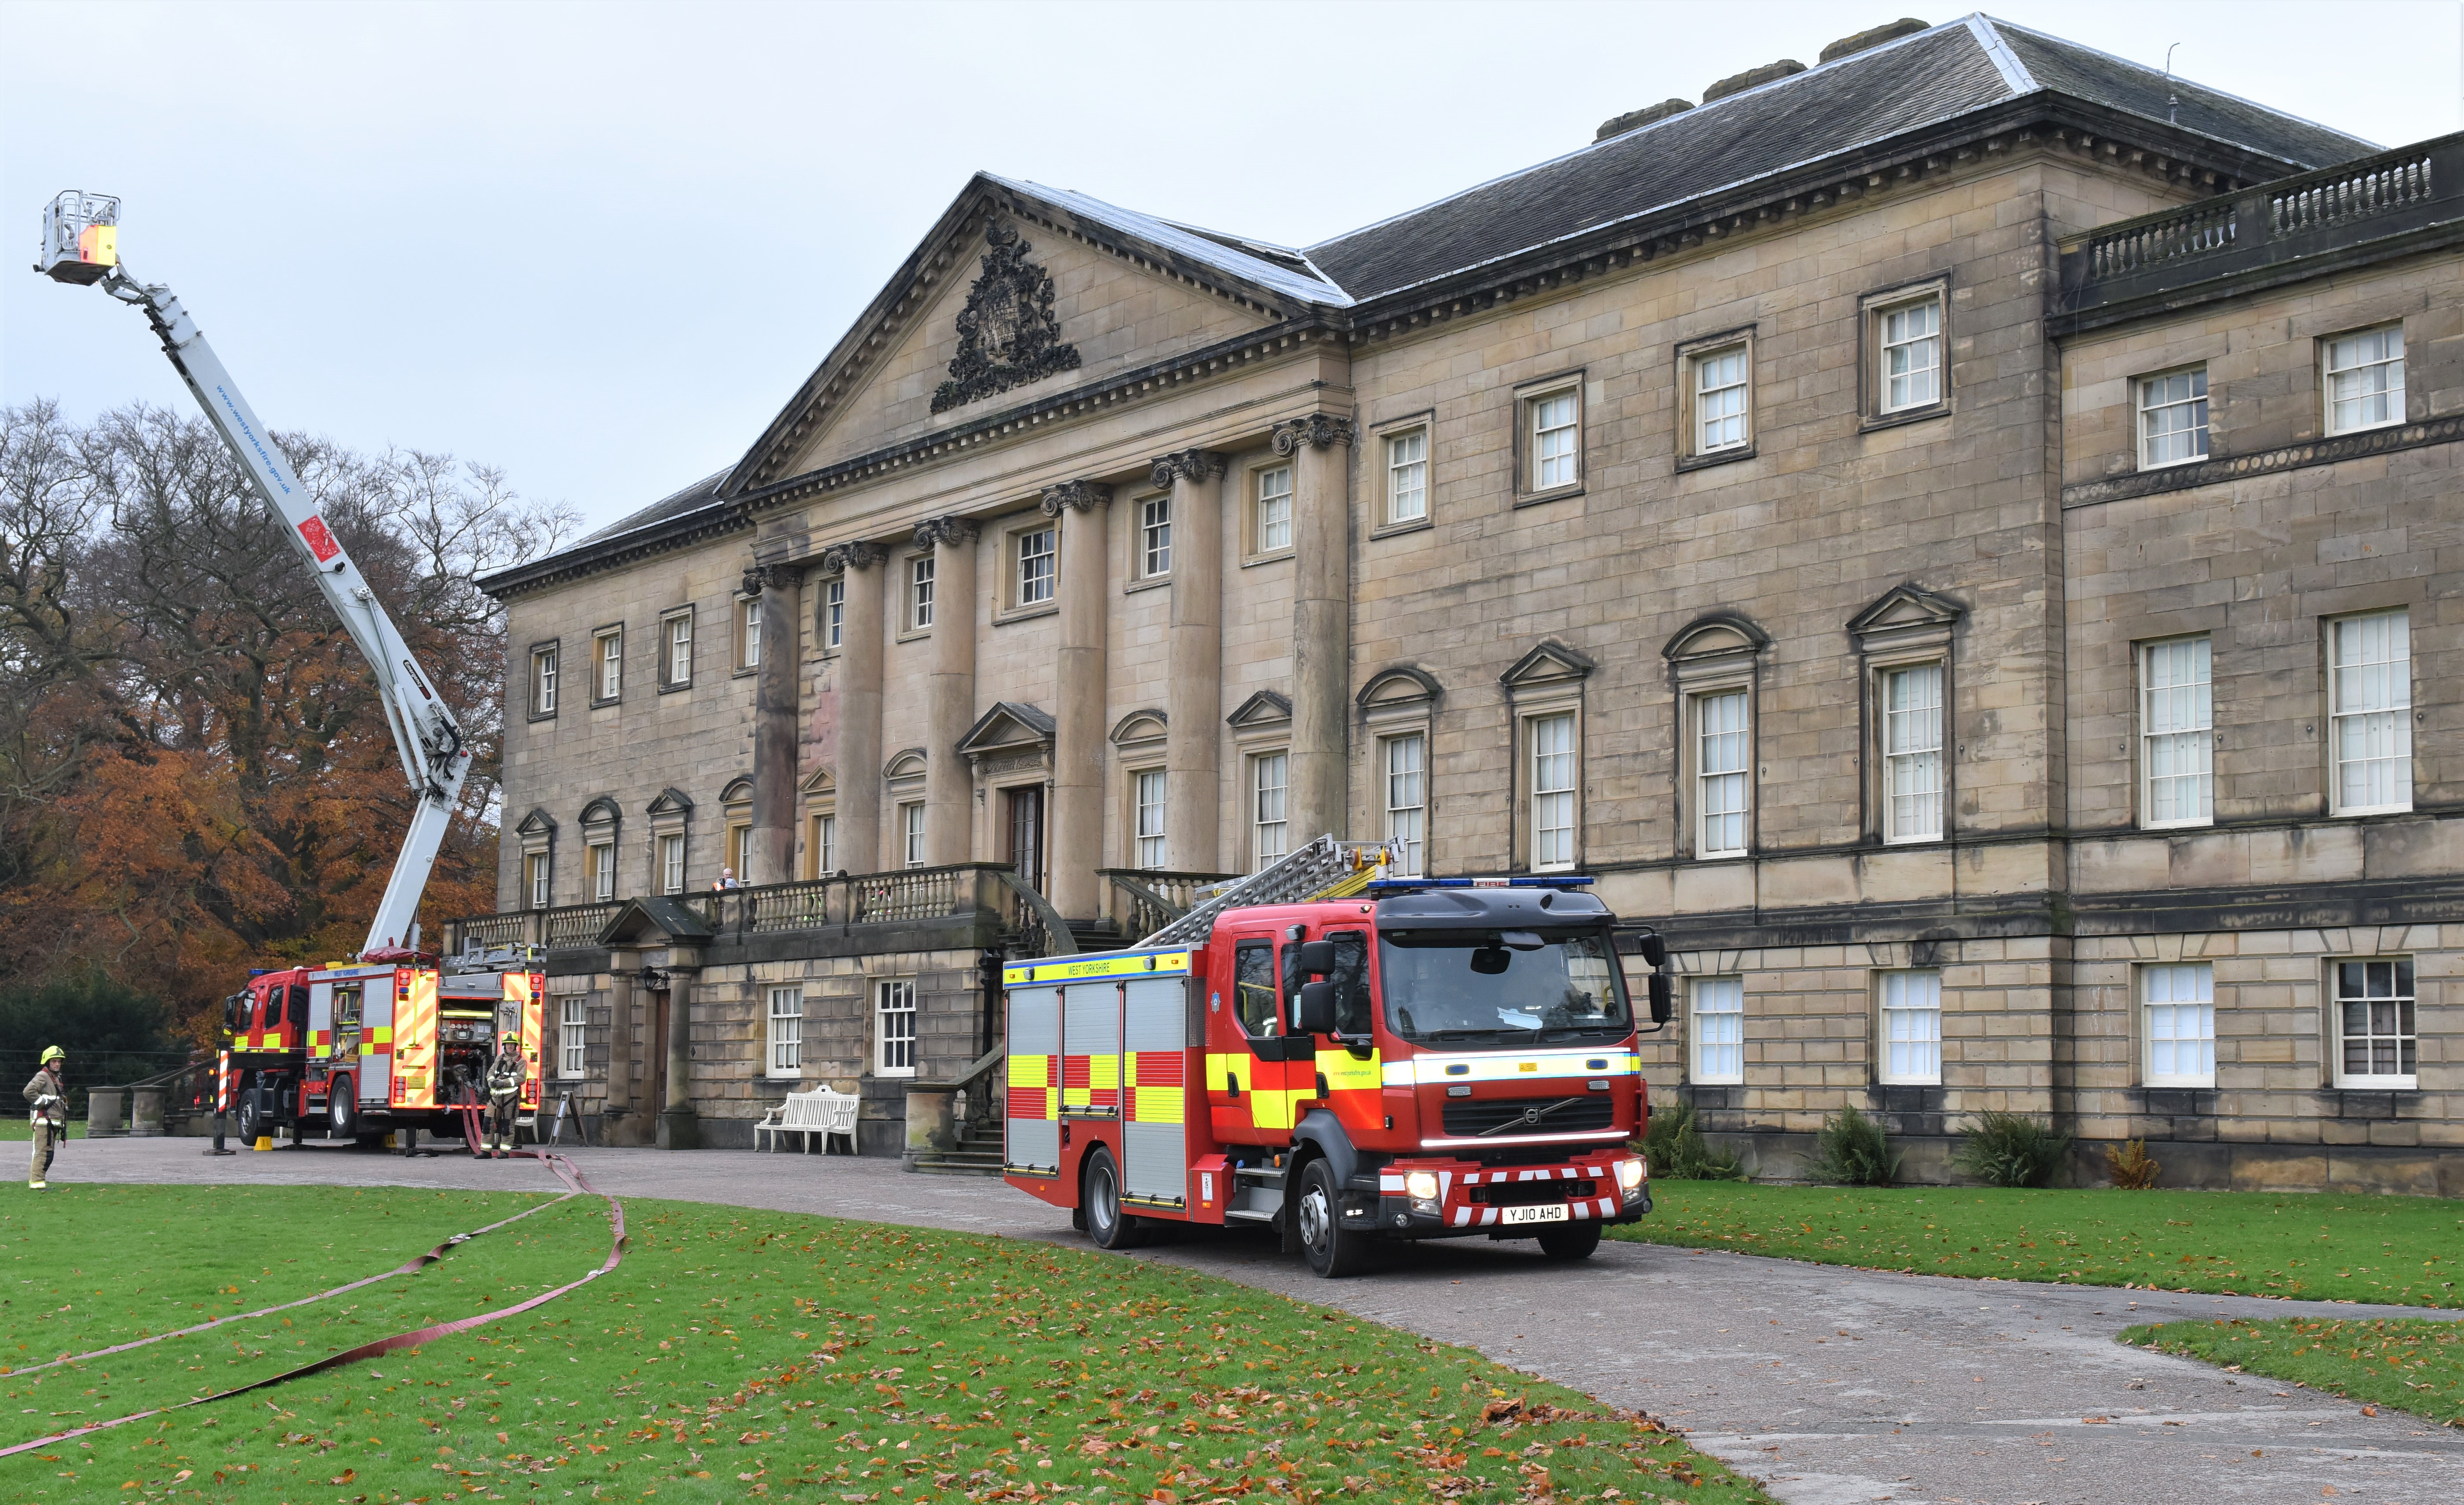 Fire engines in front of large building.